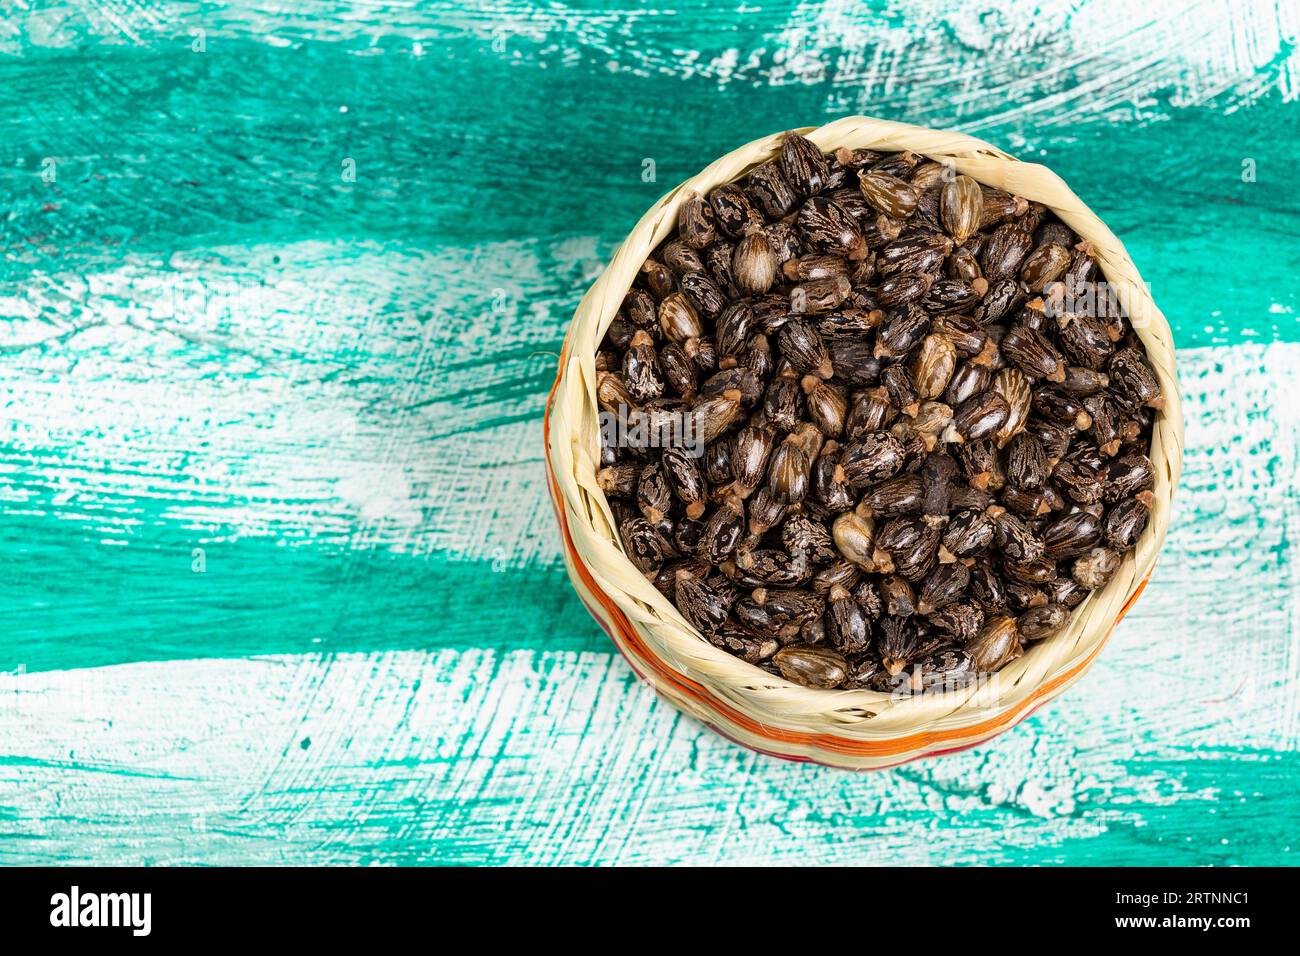 Ricinus Communis – Dried Seeds Of The Fruit Of The Castor Bean Plant. Stock Photo